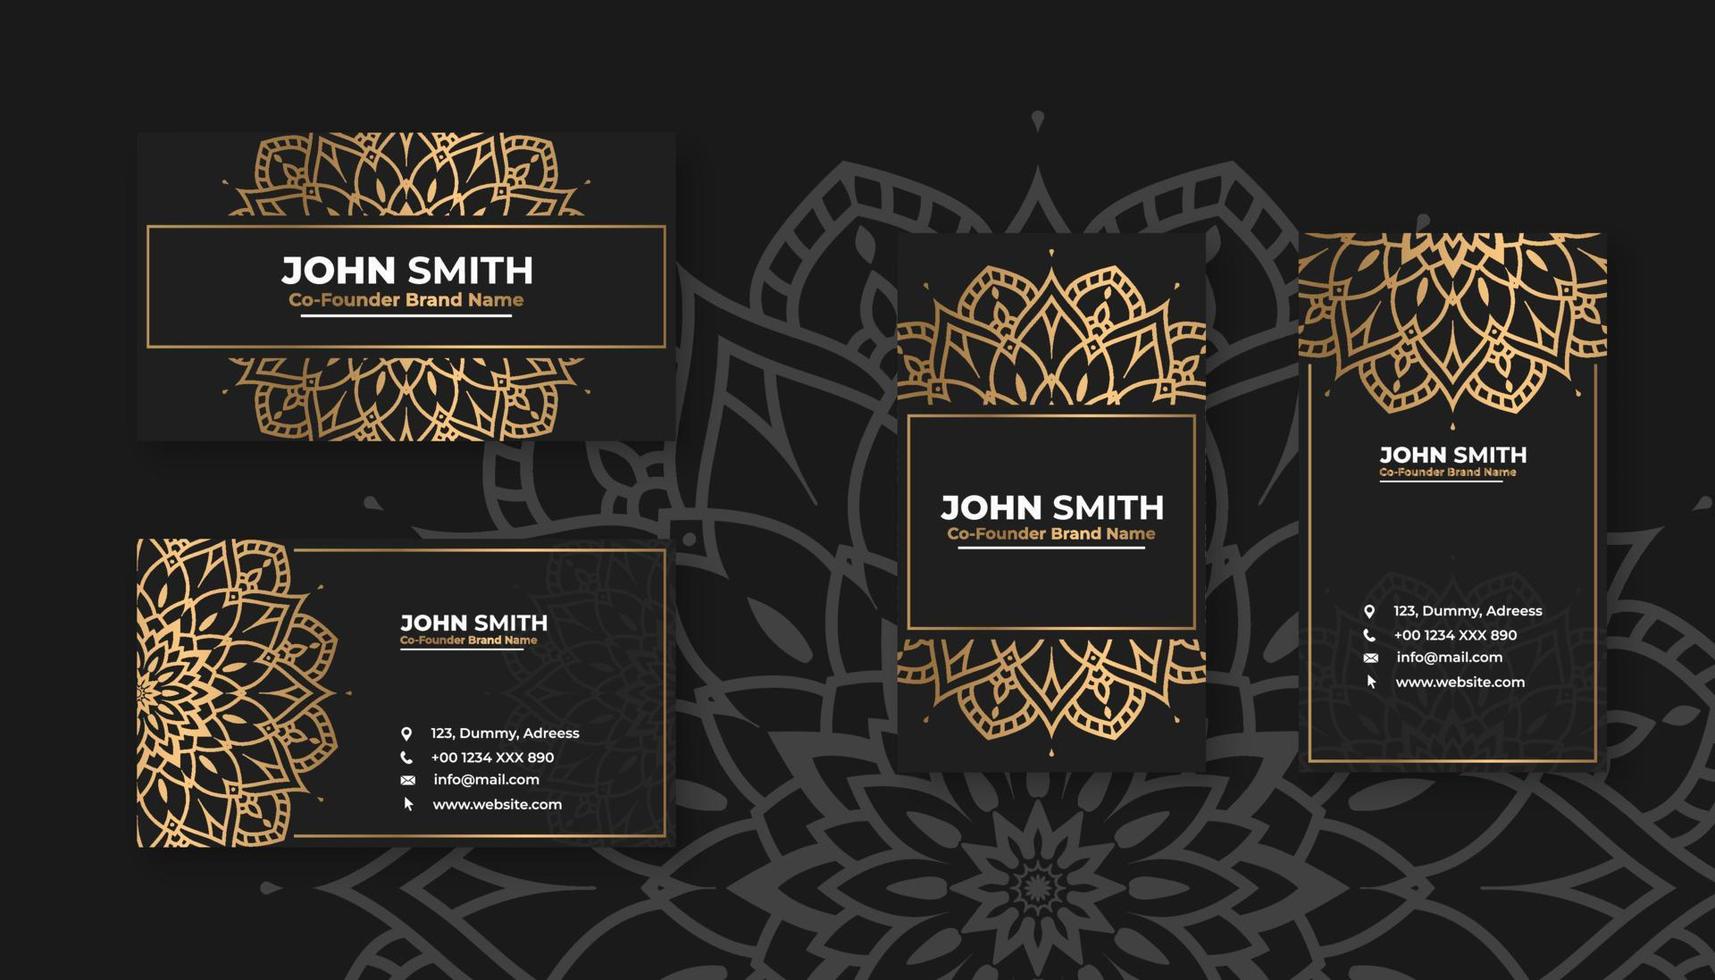 Luxury black business card with golden mandala decoration designs, Bright floral ornamental elements vector